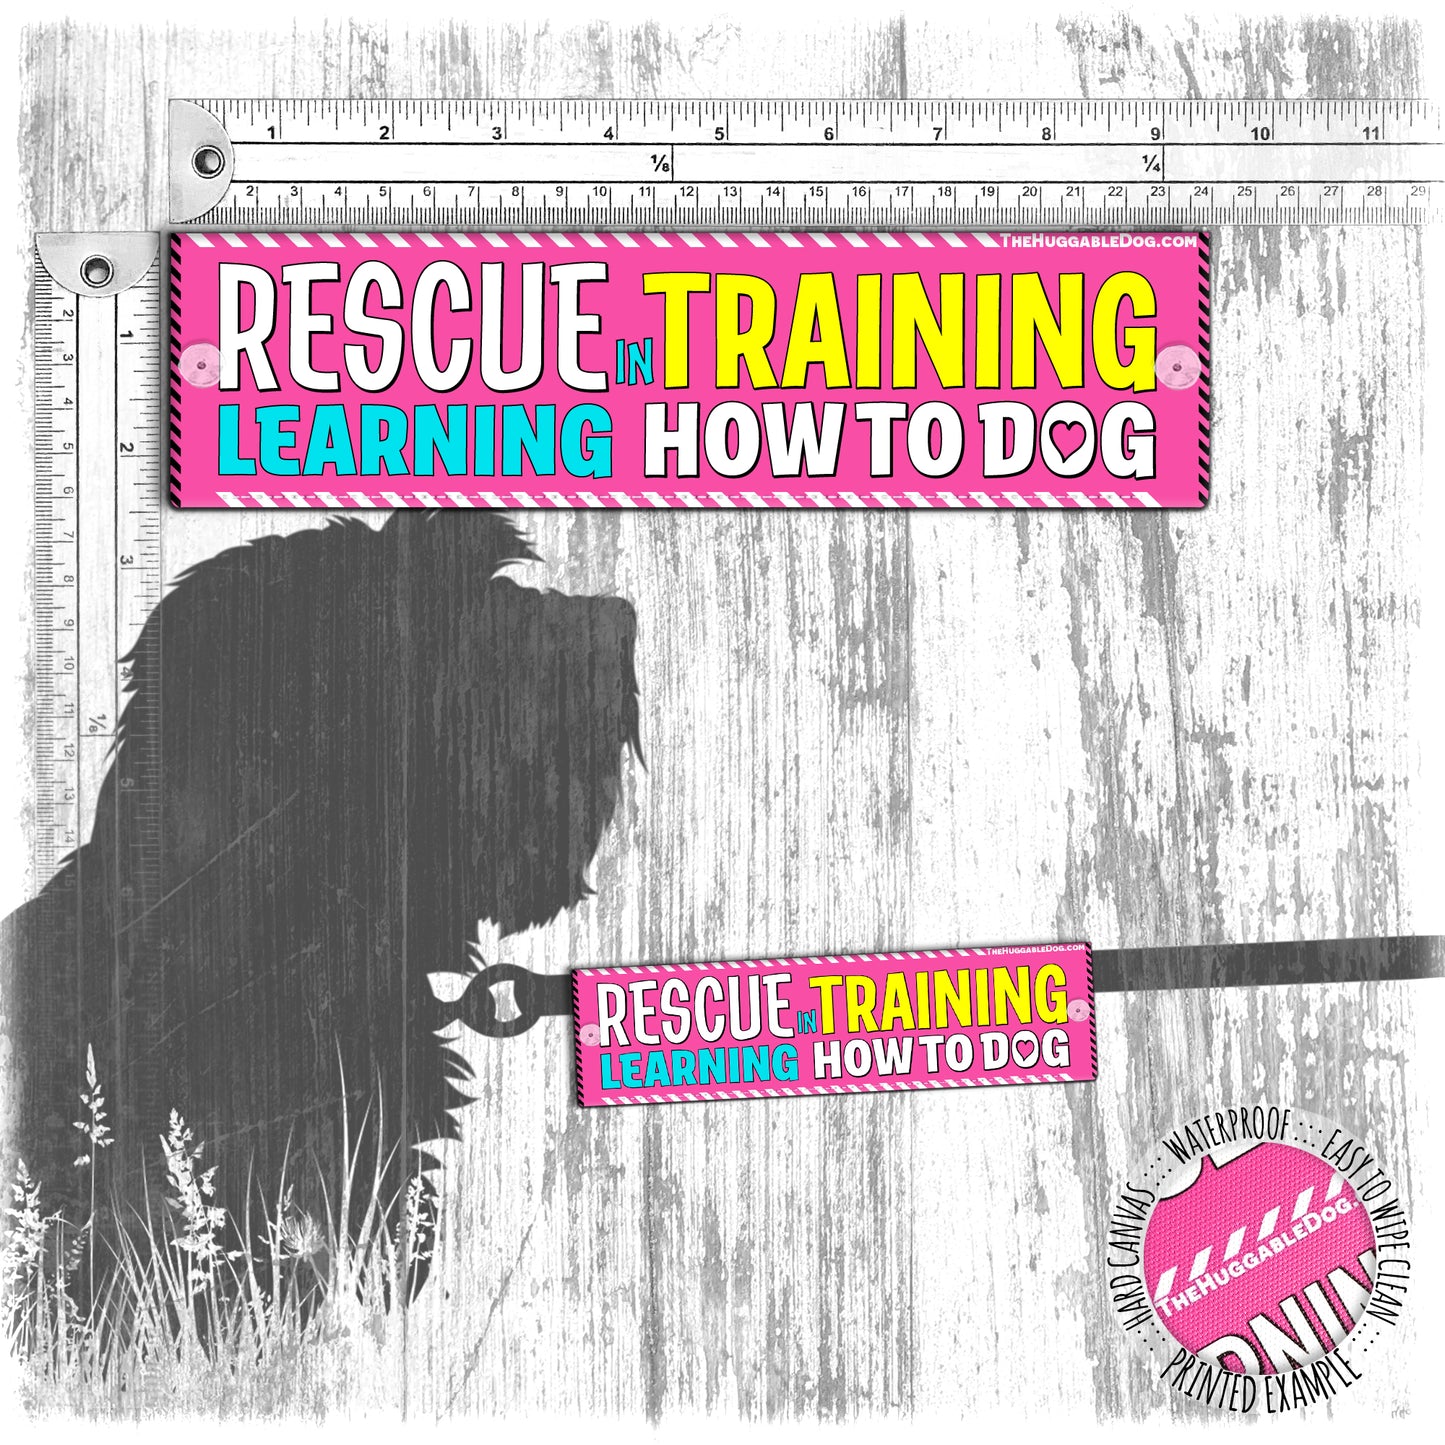 "Rescue in TRAINING, learning how to dog". Leash sleeve for dog training.